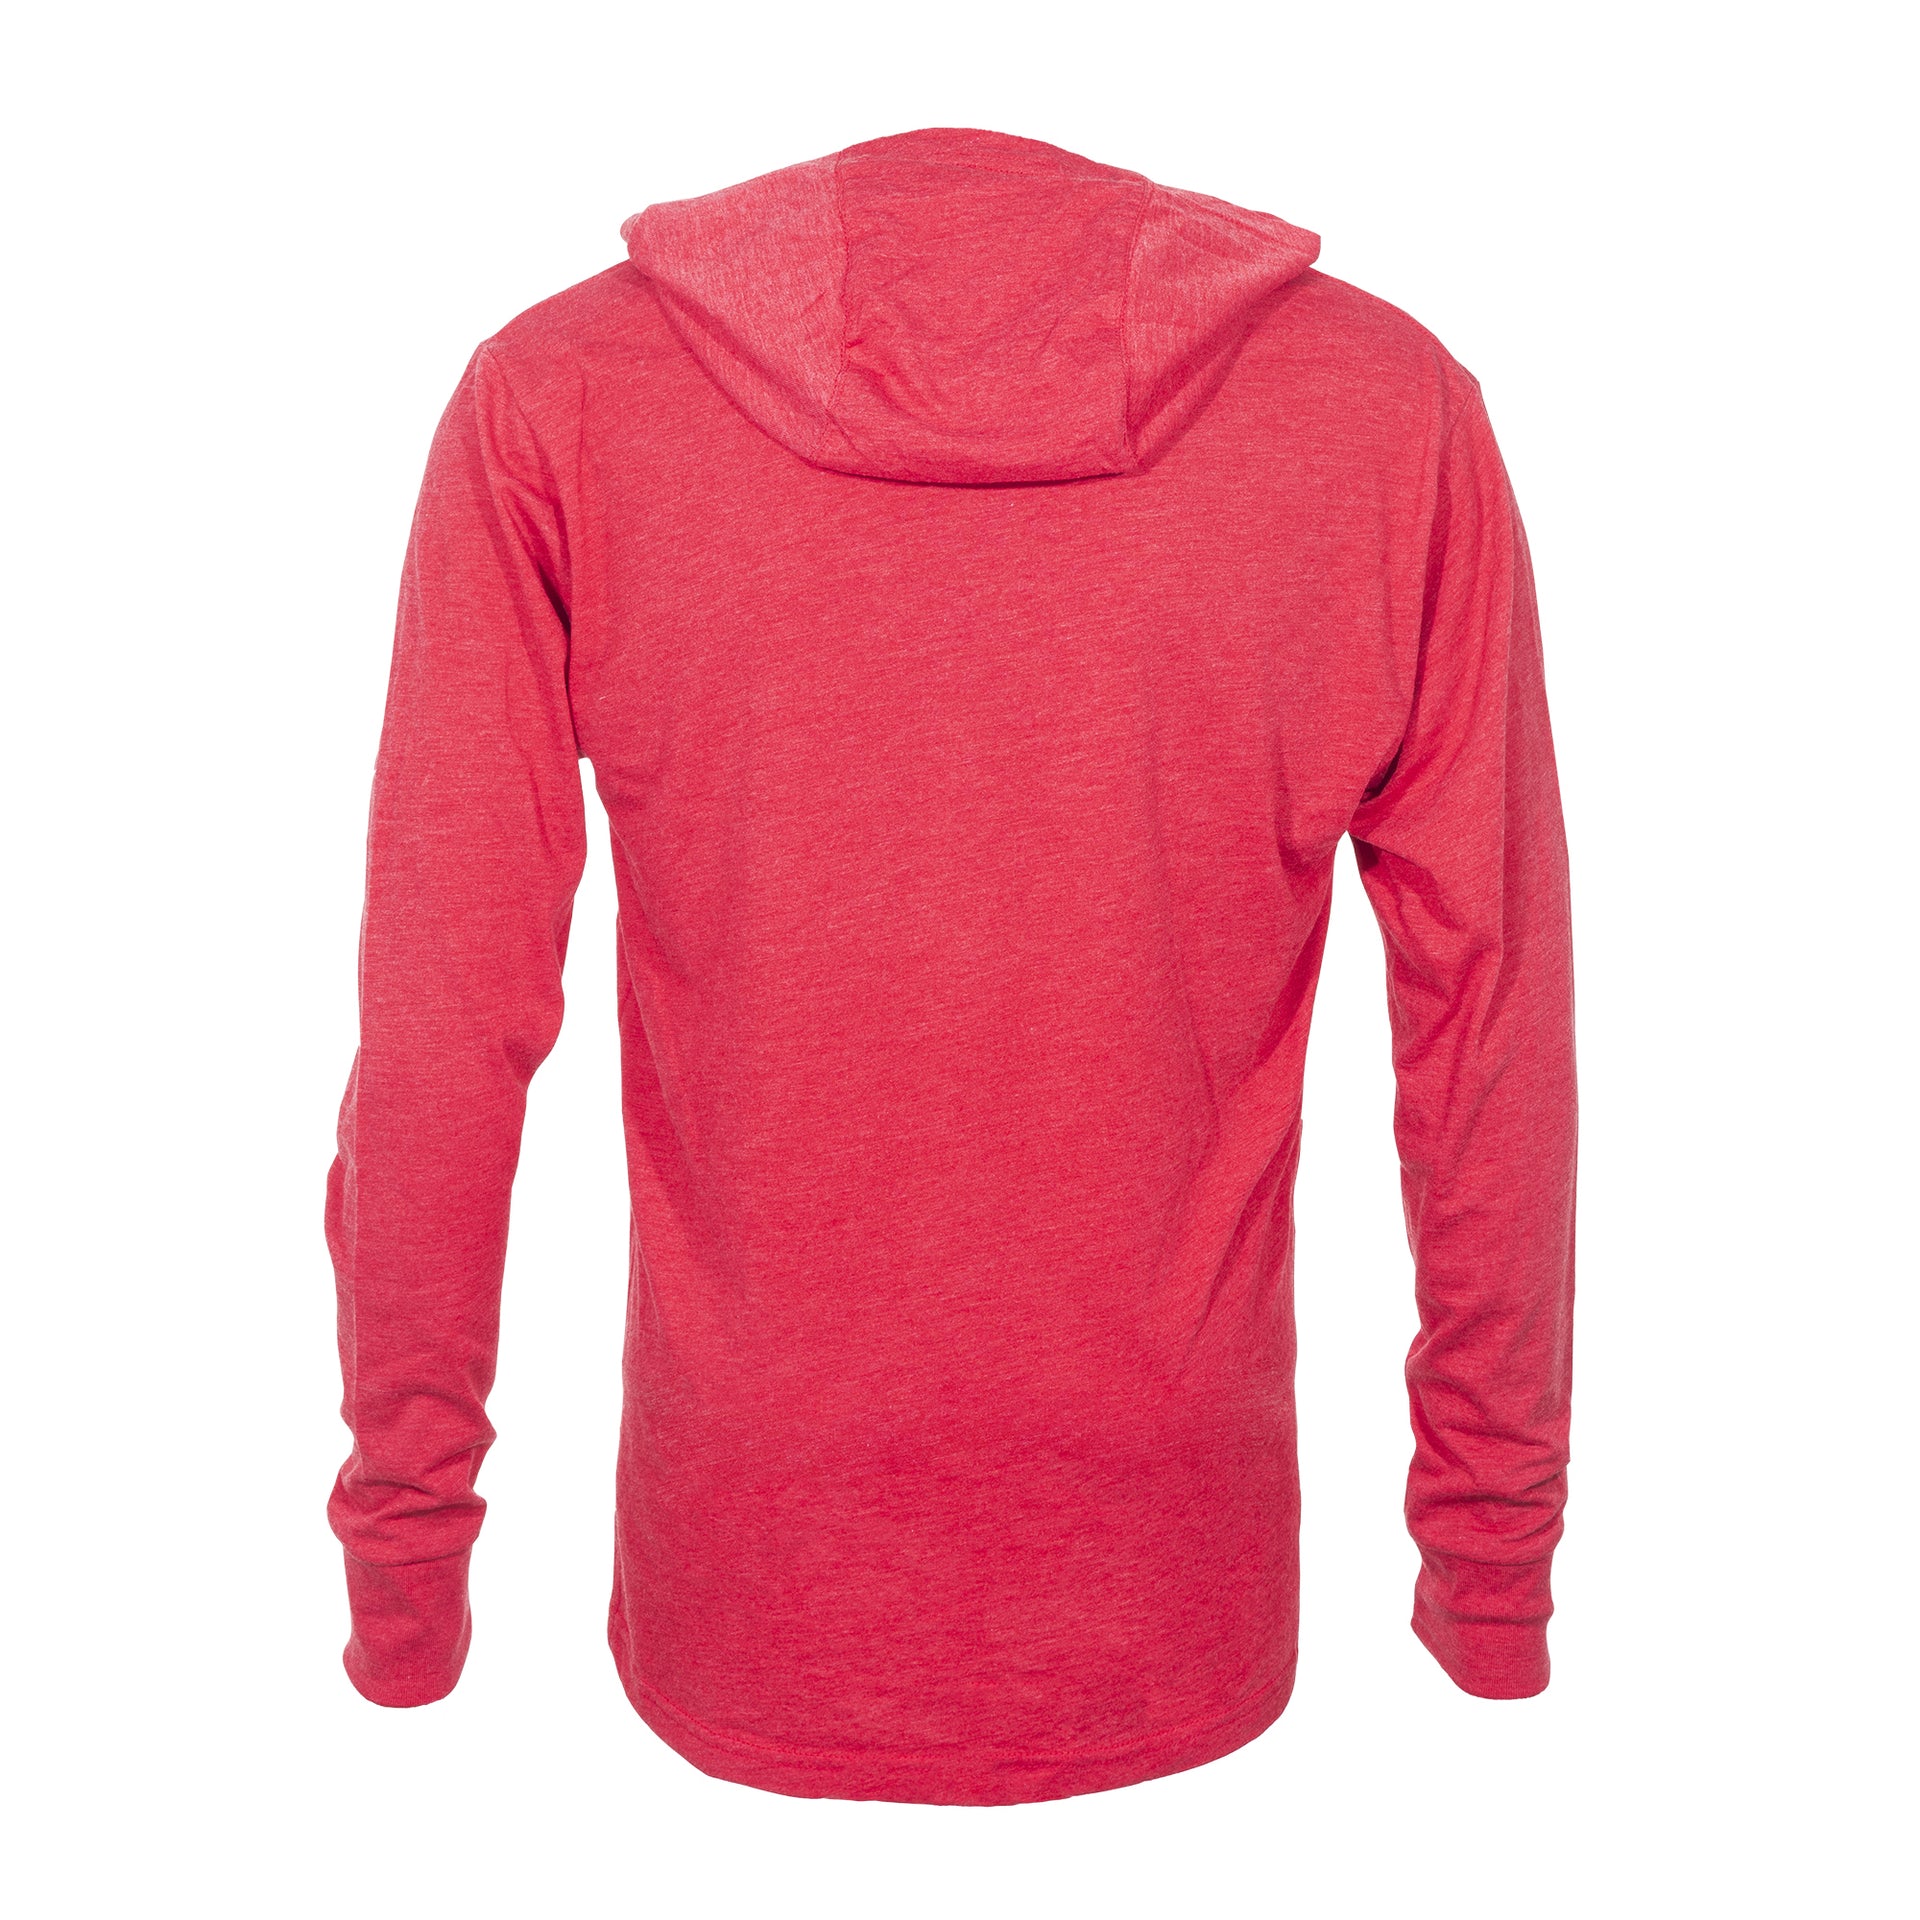 JUNK Tri-Blend Red Hooded Tee - View 2